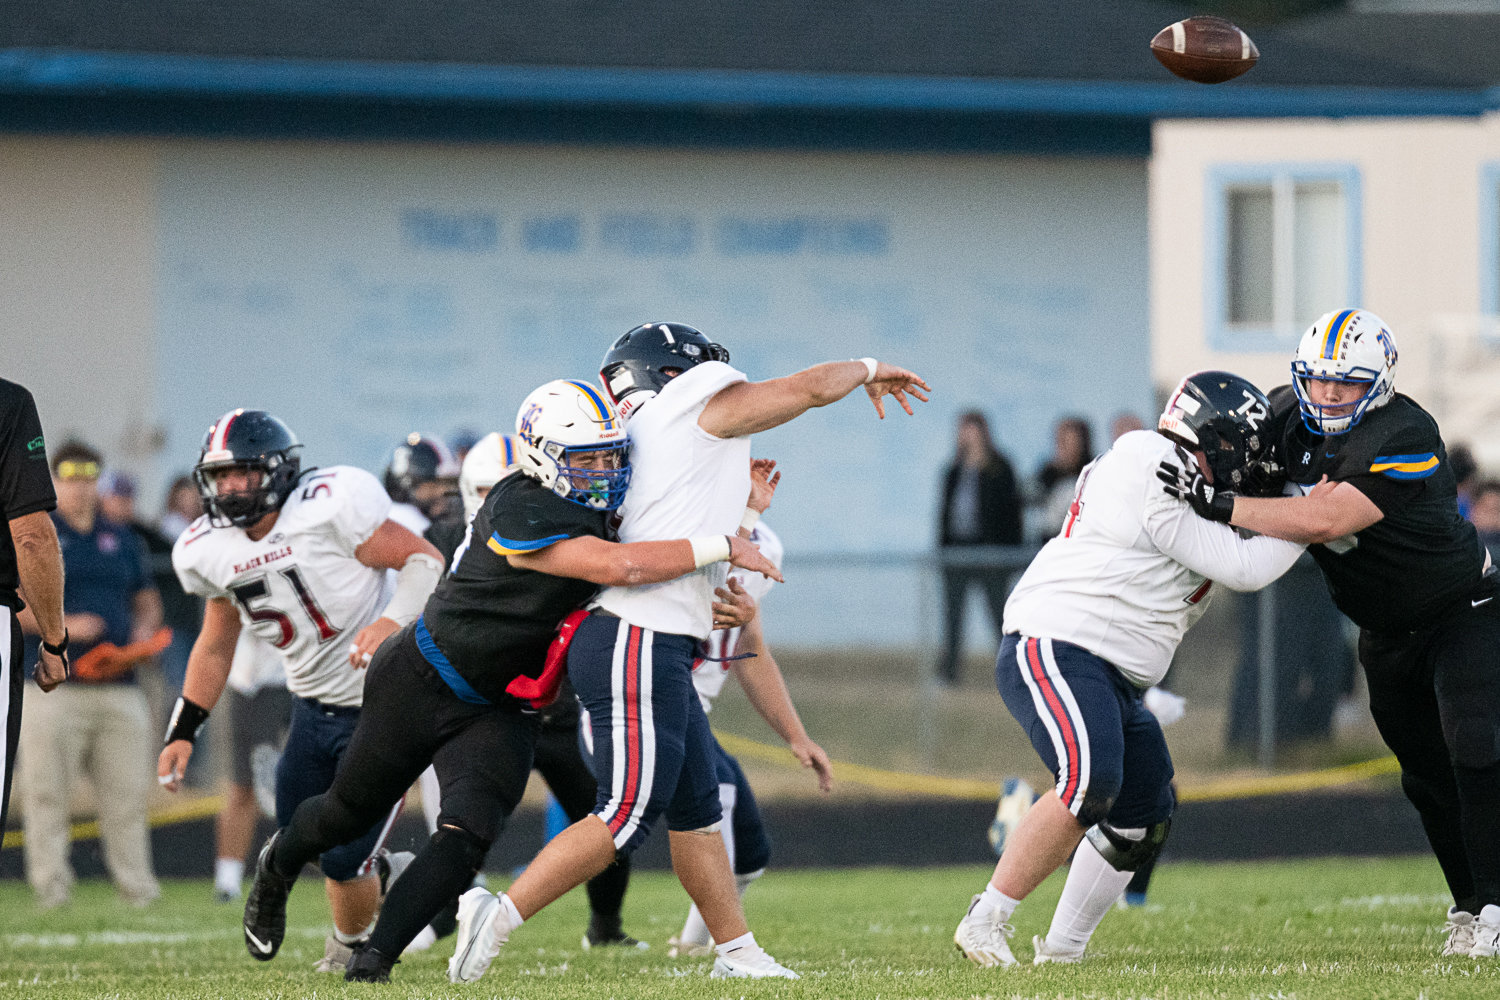 Black Hills quarterback Jaxsen Beck is hit as he throws by Rochester's Jaden Nichols Sept. 16 in the Wolves 34-14 win.